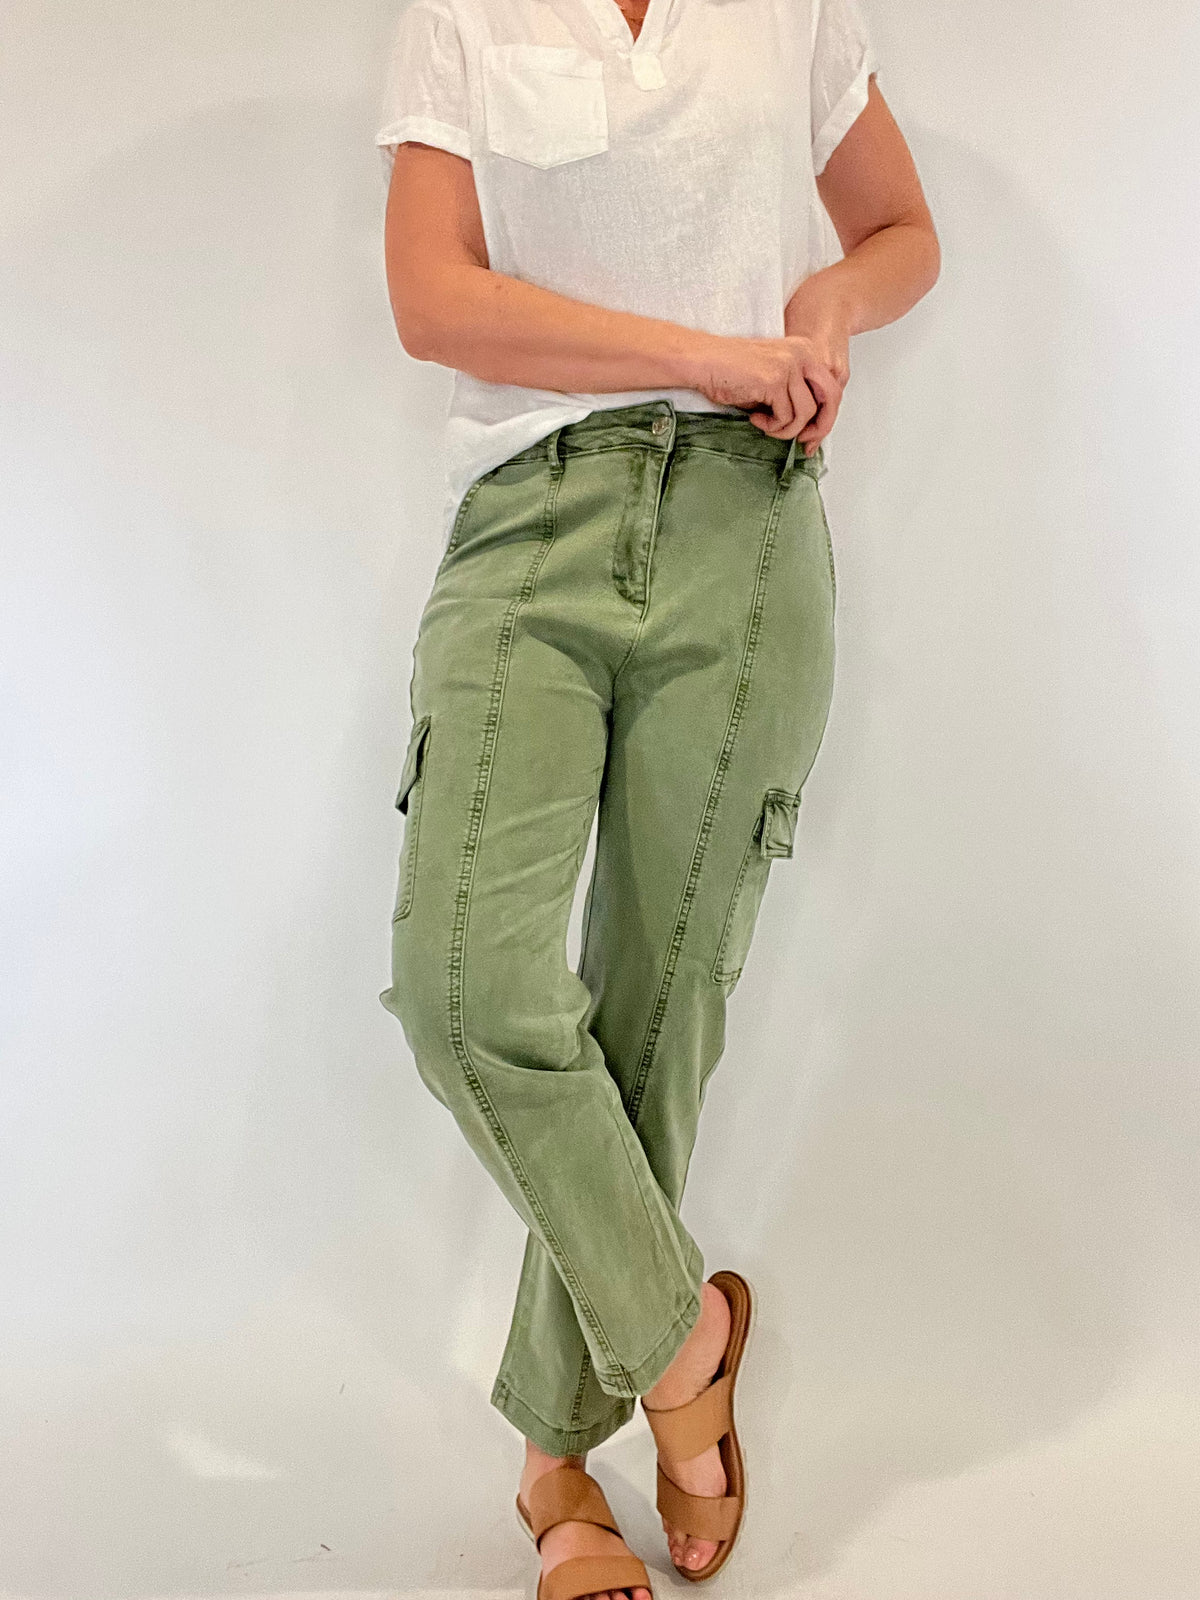 Indulge in a sense of effortless refinement with our Cargo Pants in olive green. Featuring front and back pockets, a straight fit, and a slight crop, these versatile pants embody casual sophistication.